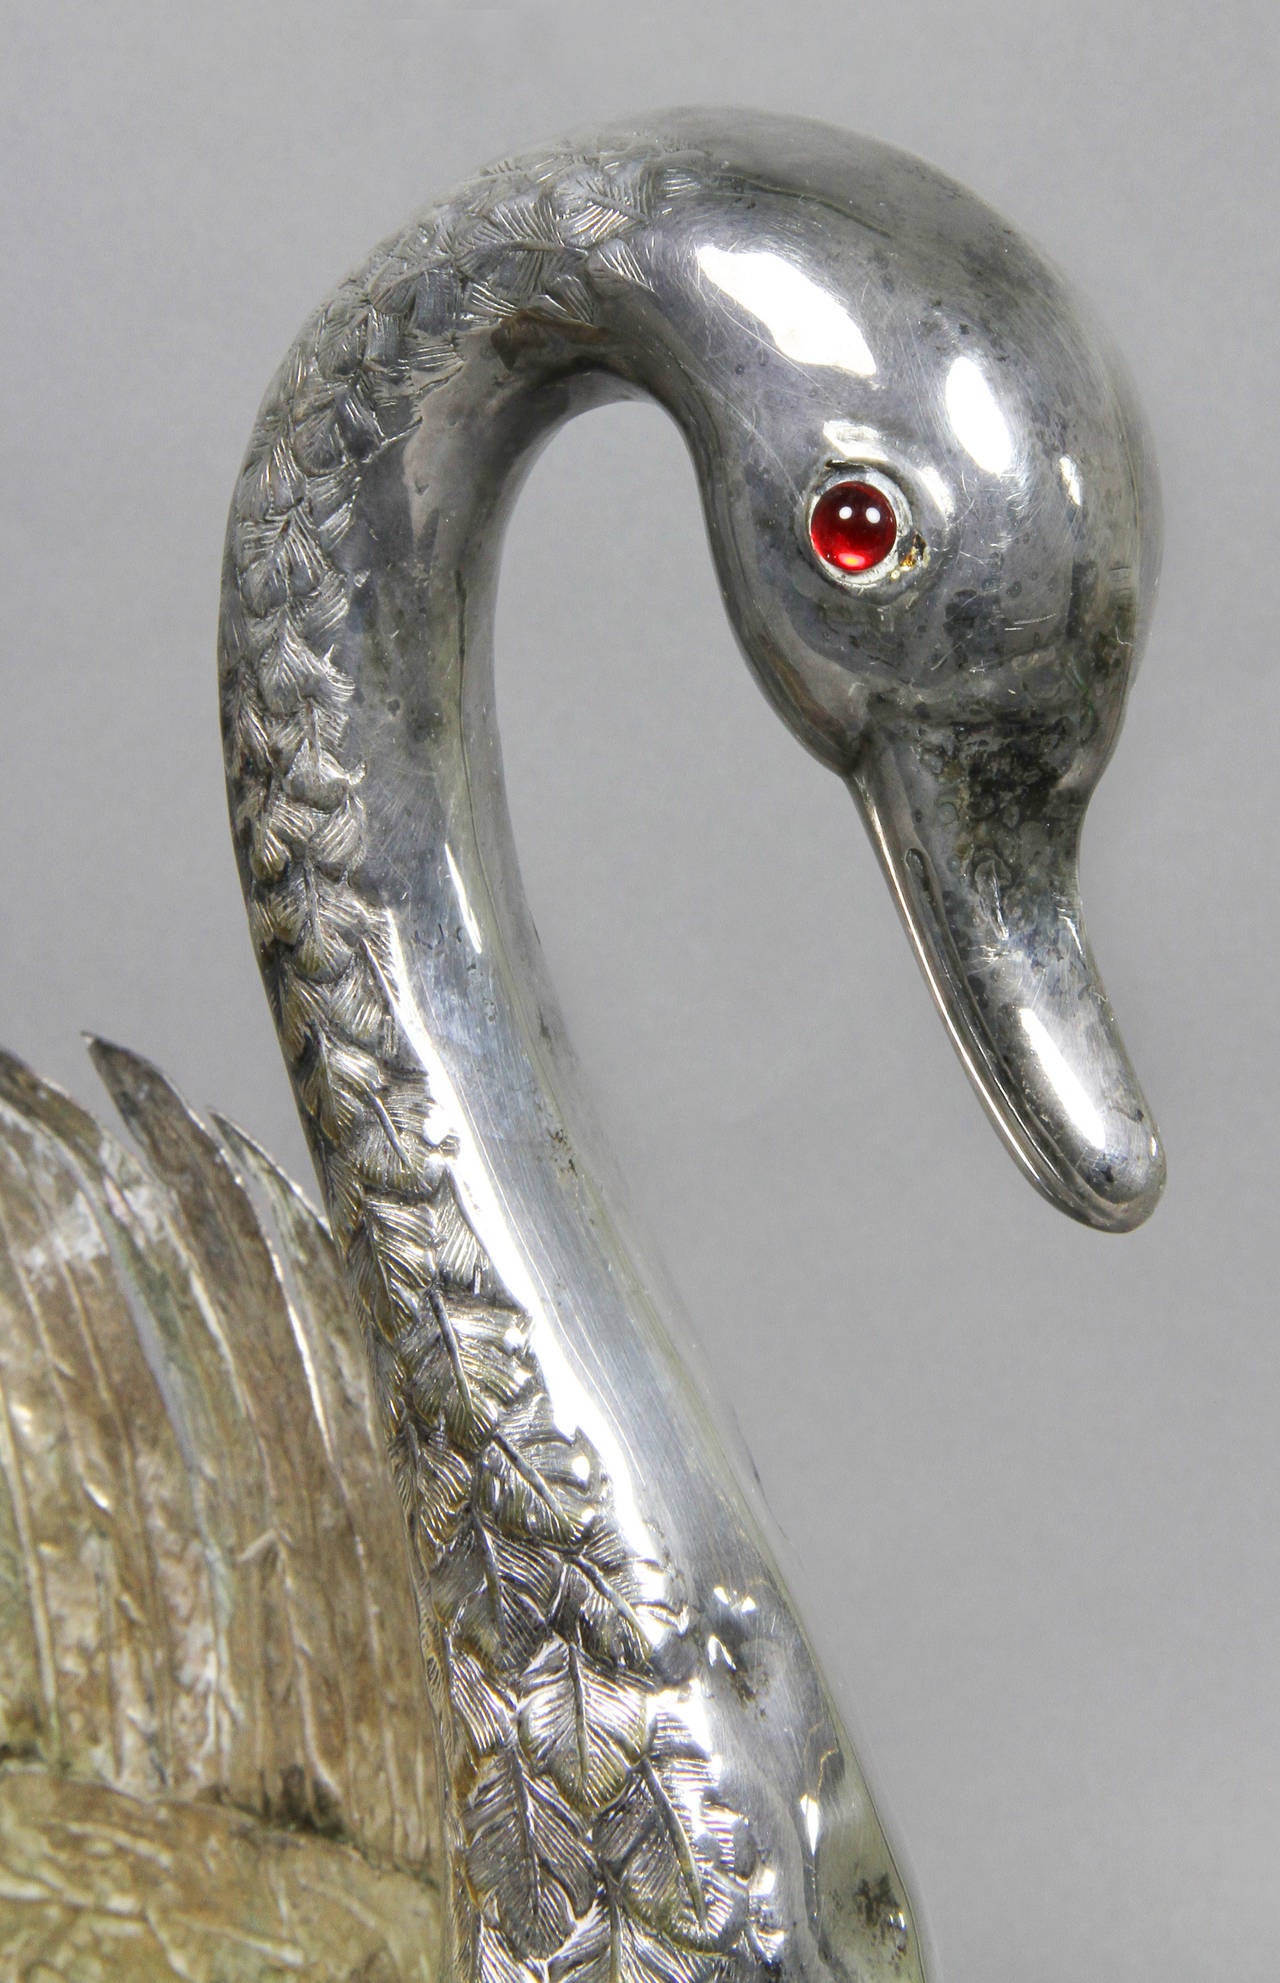 Silver plated swan form centerpiece with ruby glass eyes.